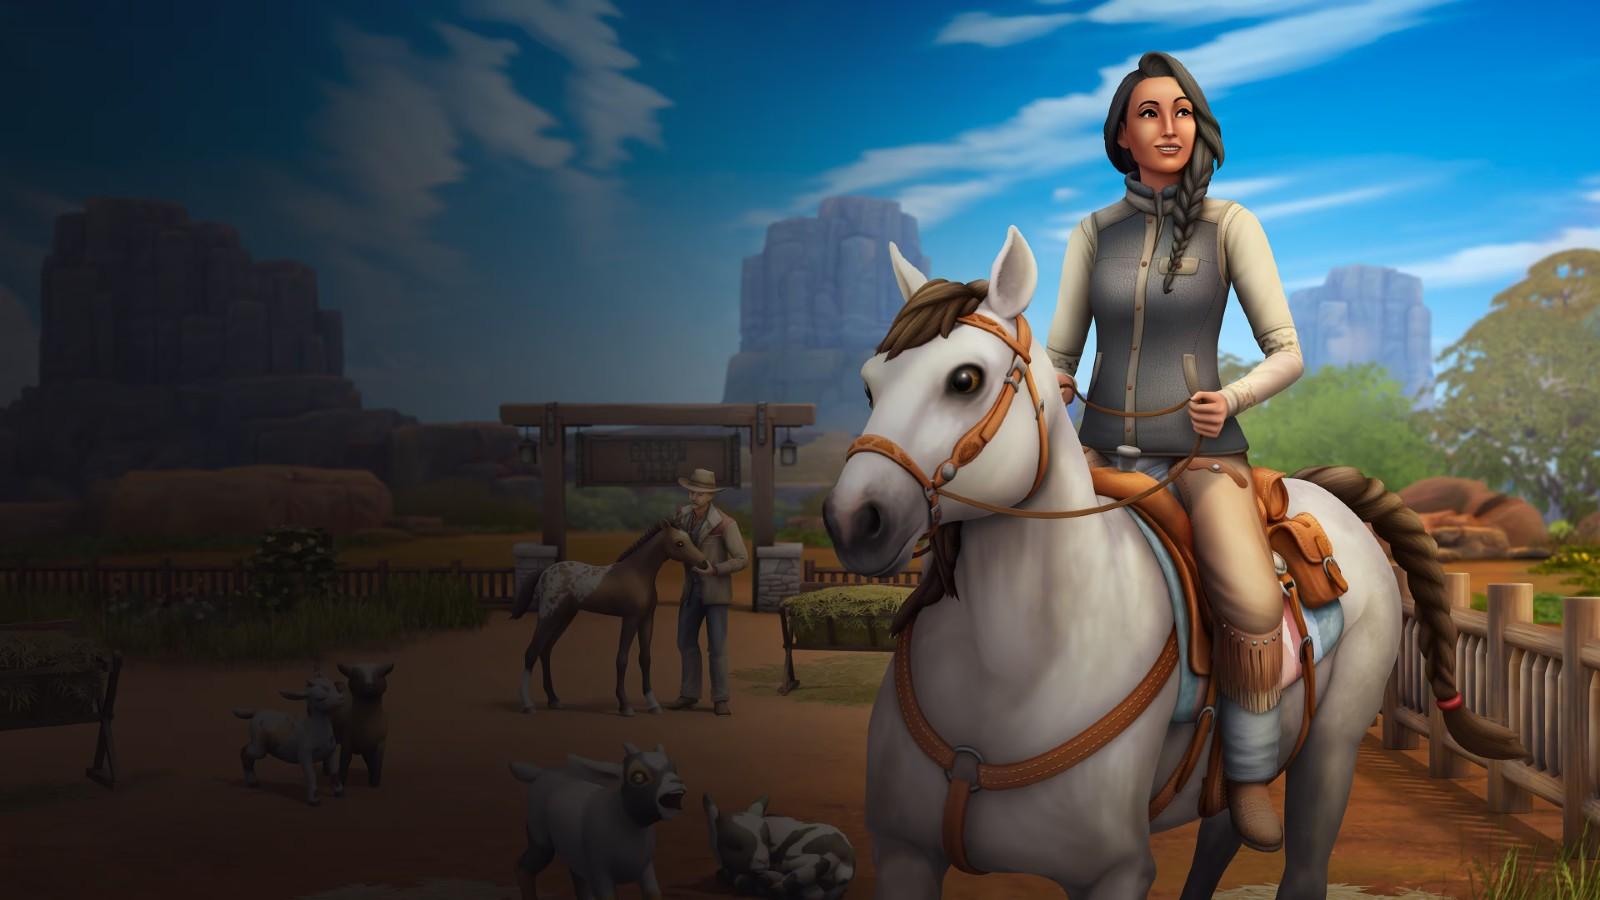 A promotional image from The Sims 4 horse ranch expansion which features new items.